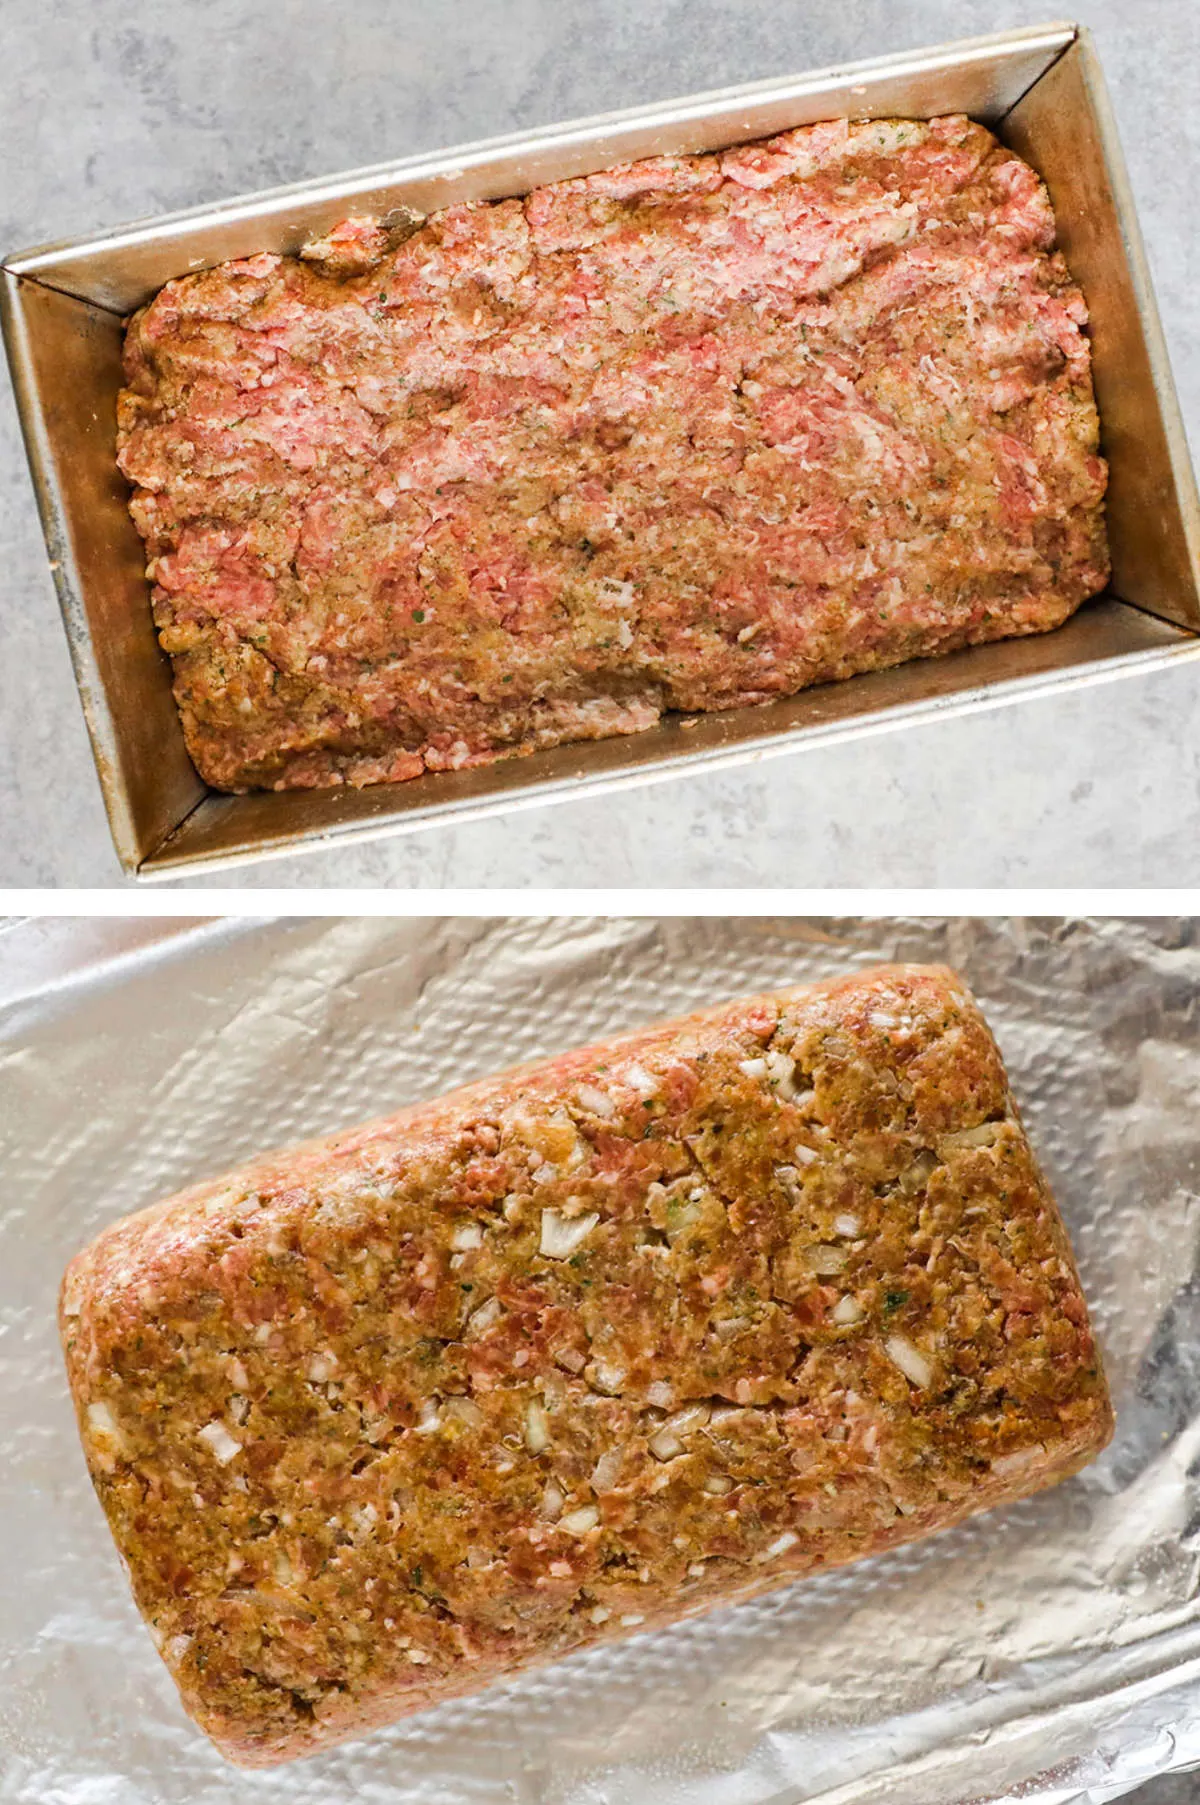 Two overhead images in one: 1. Meatloaf packed into a loaf pan. 2. Meatloaf flipped onto a baking sheet covered with foil. 